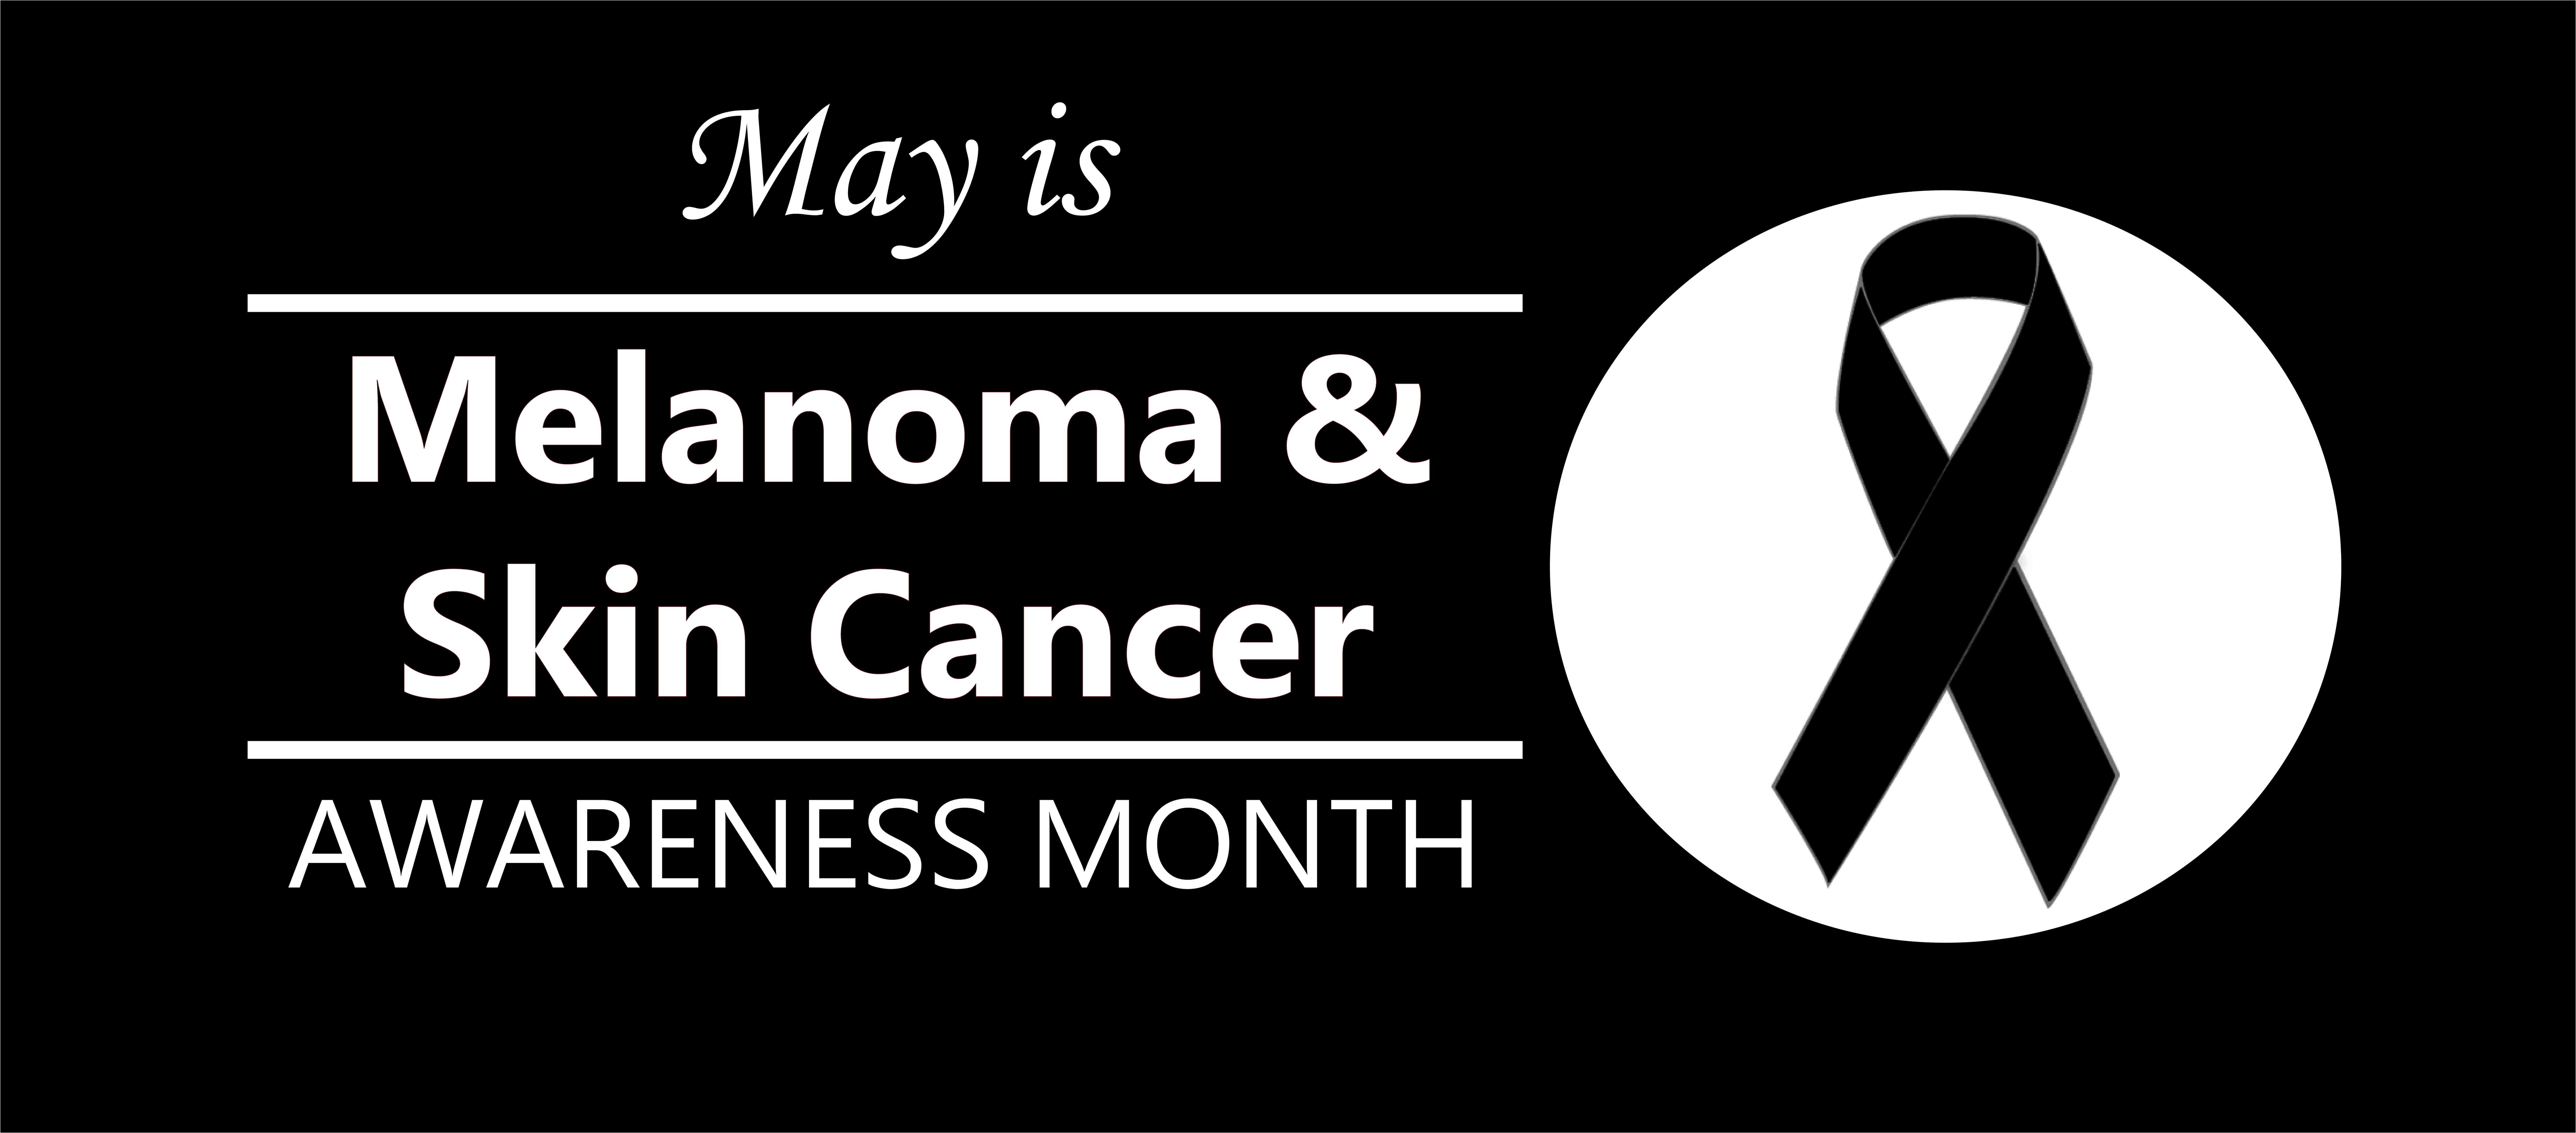 May is Melanoma & Skin Cancer Month